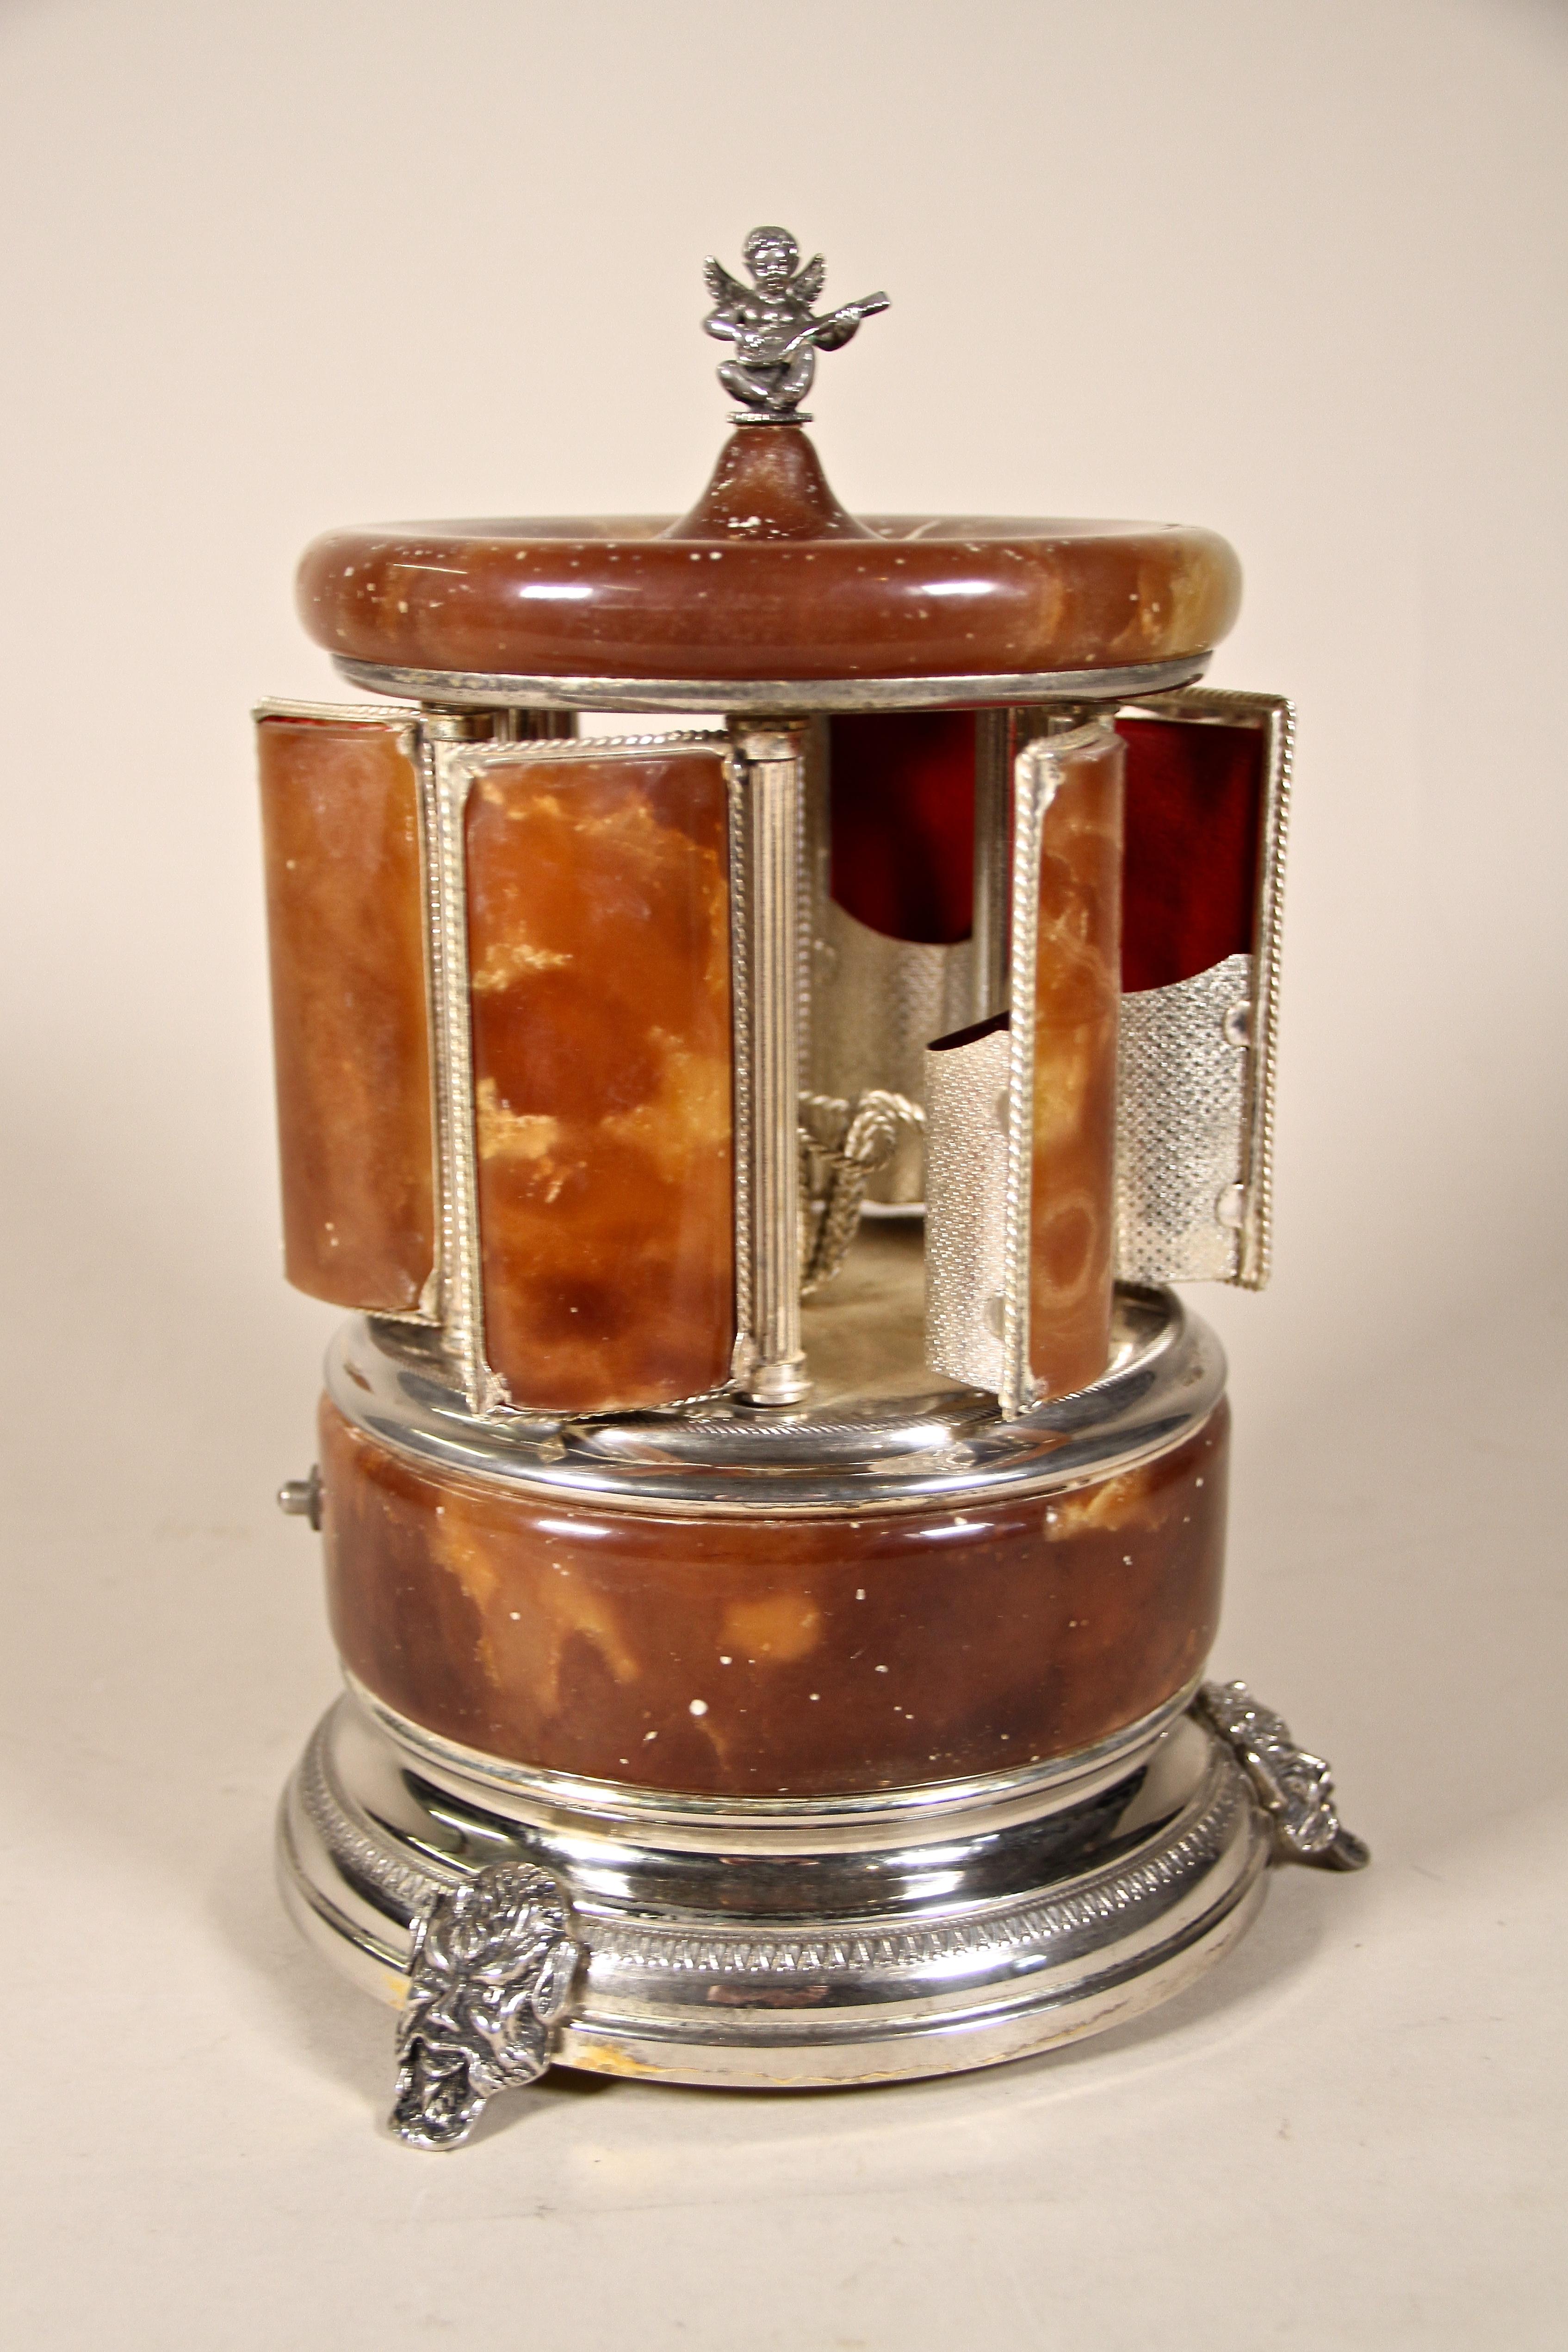 Uncommon cigarette/ cigar holder music box from the mid-century period in Italy around 1960. Beautifully designed as Tempietto with onyx and silvered parts, this exceptional music box carries an amazing secret: when you push the button on the base,